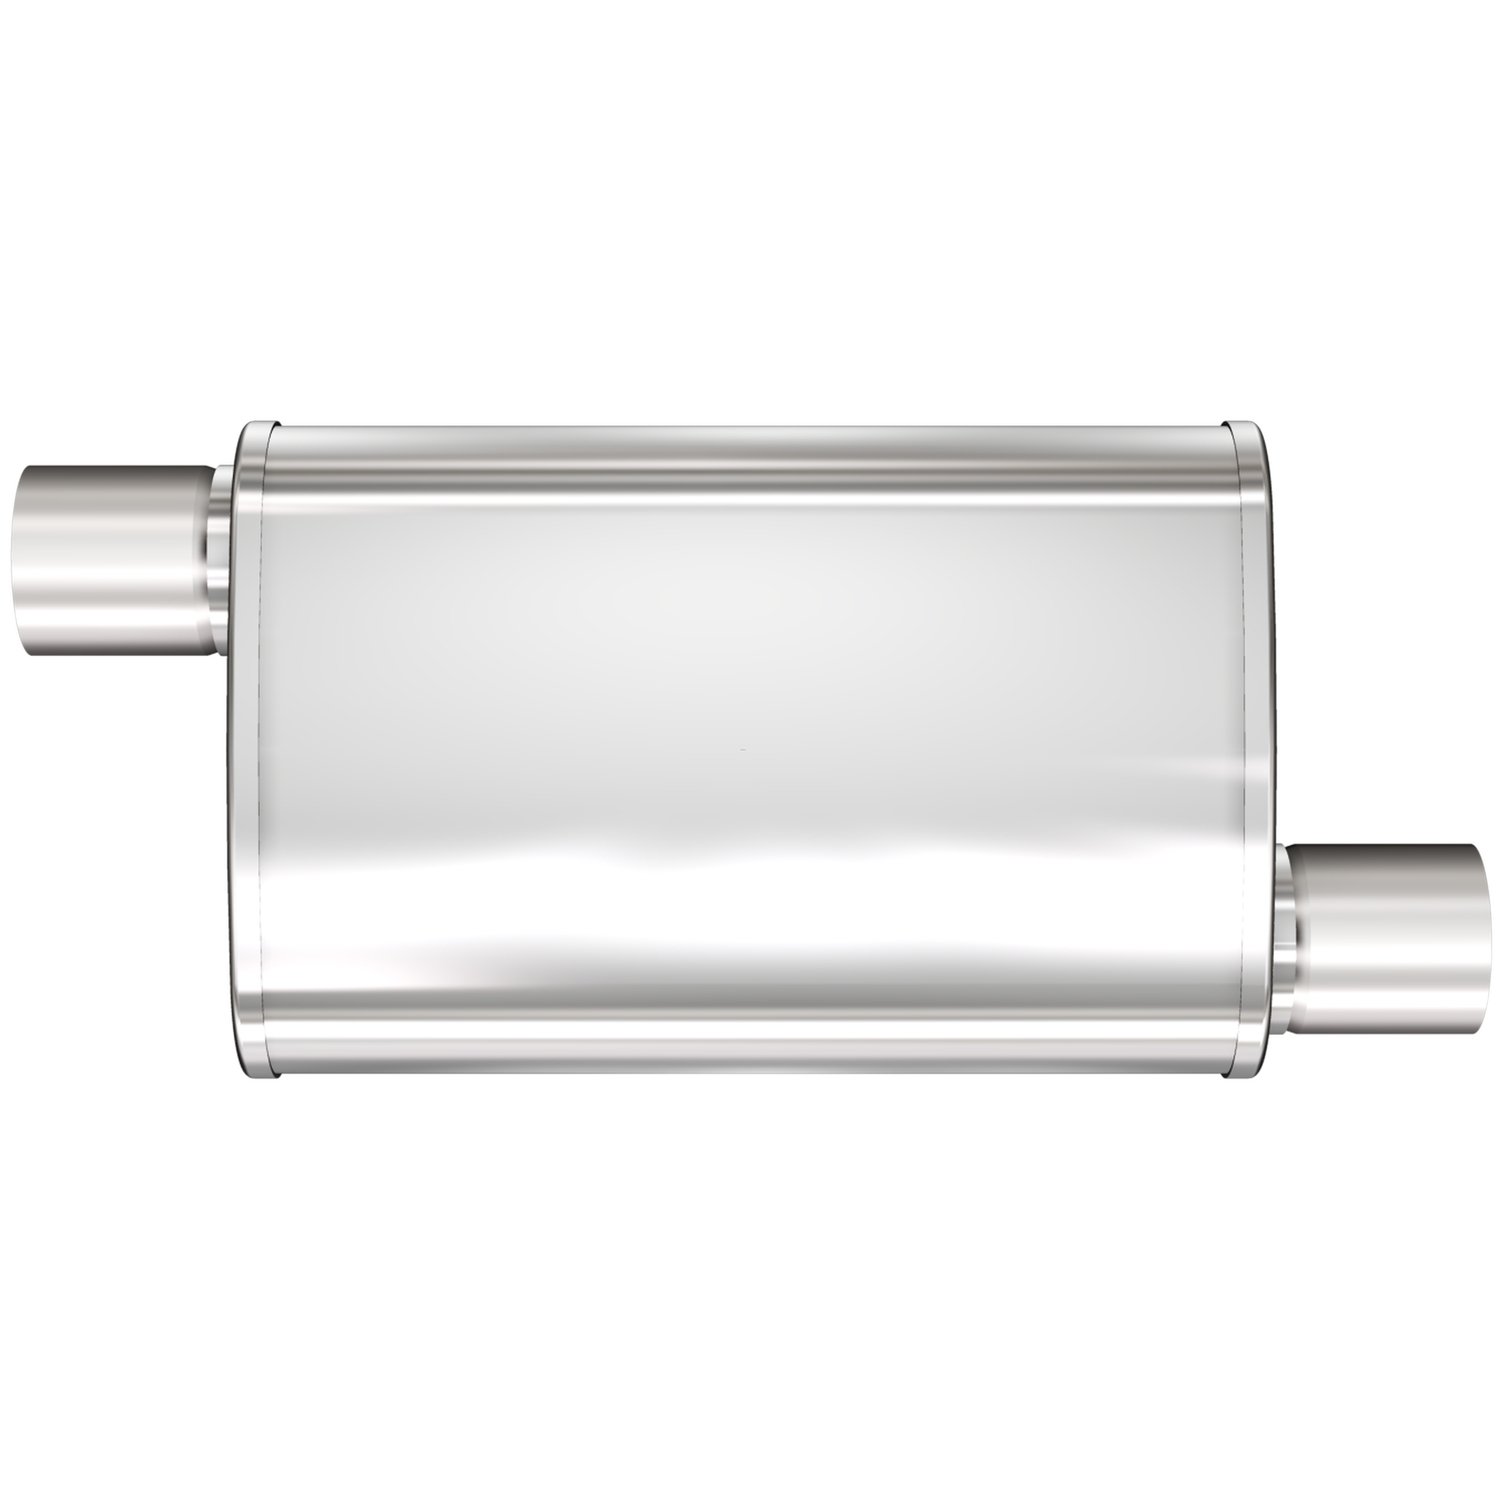 4" x 9" Oval XL 3-Chamber Muffler Offset In/Offset Out: 3"/3" Body Length: 18" Overall Length: 24" Satin Finish